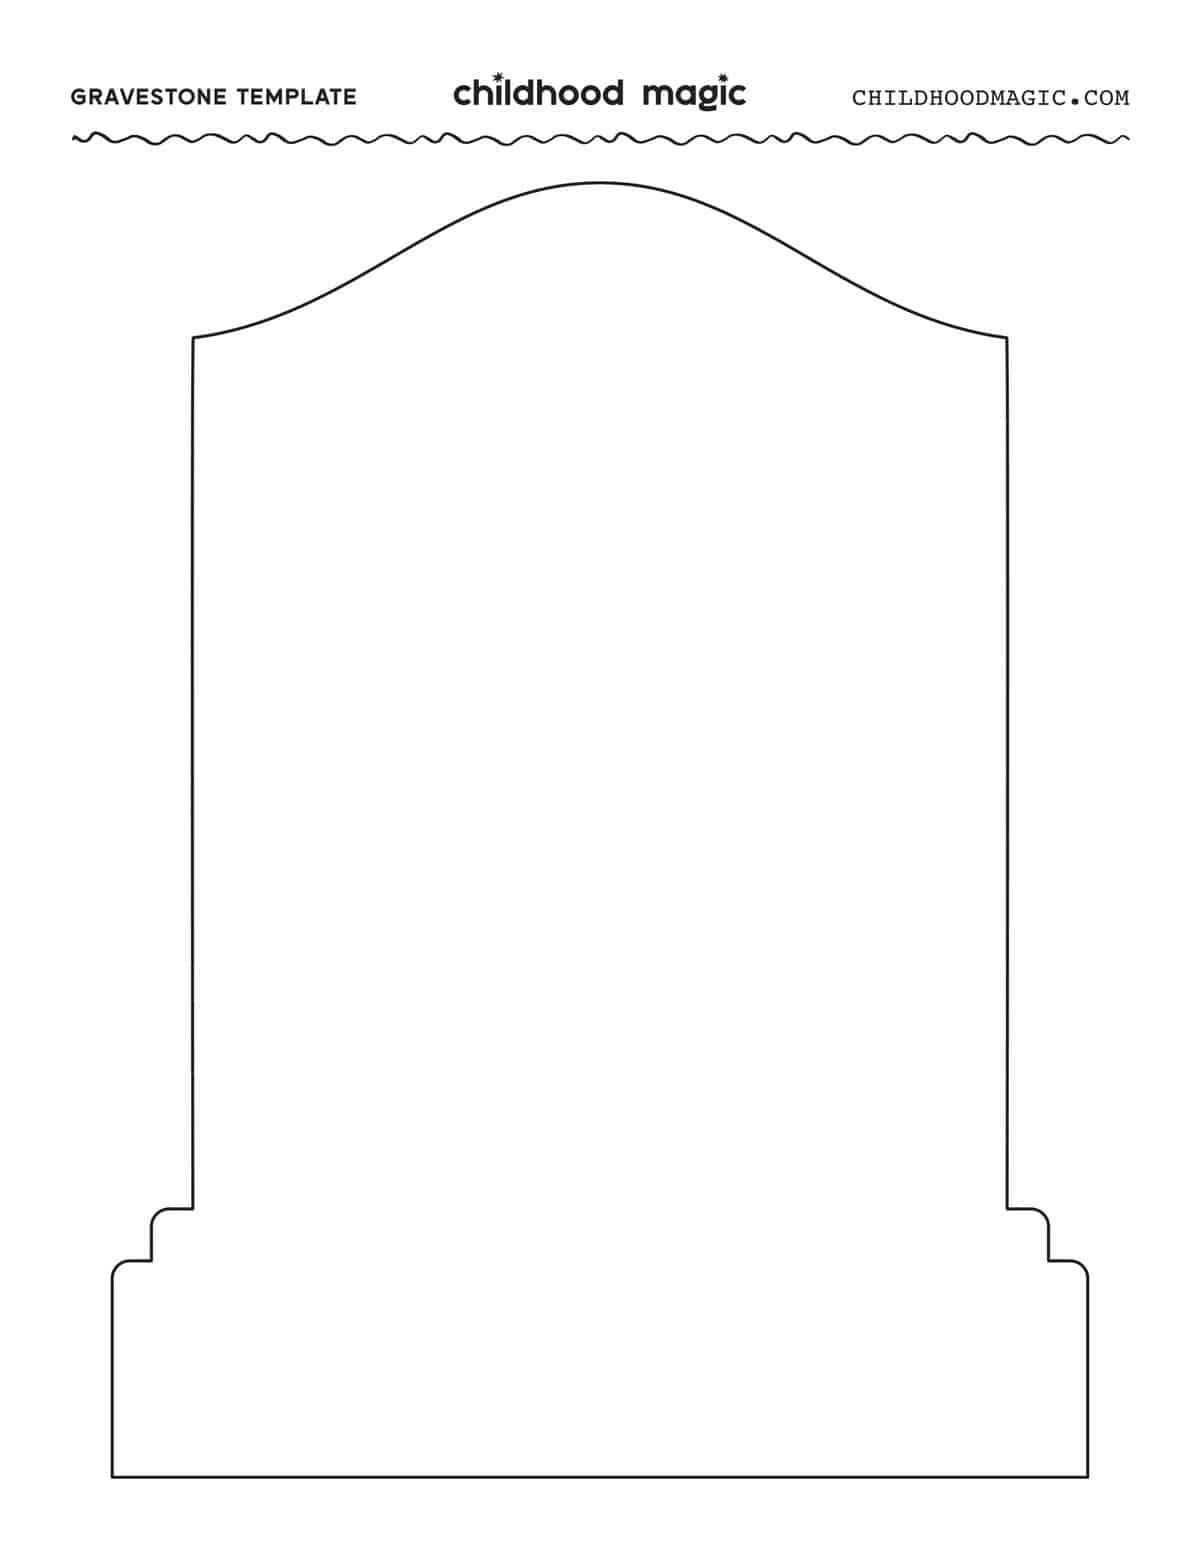 Blank Tombstone Coloring Page